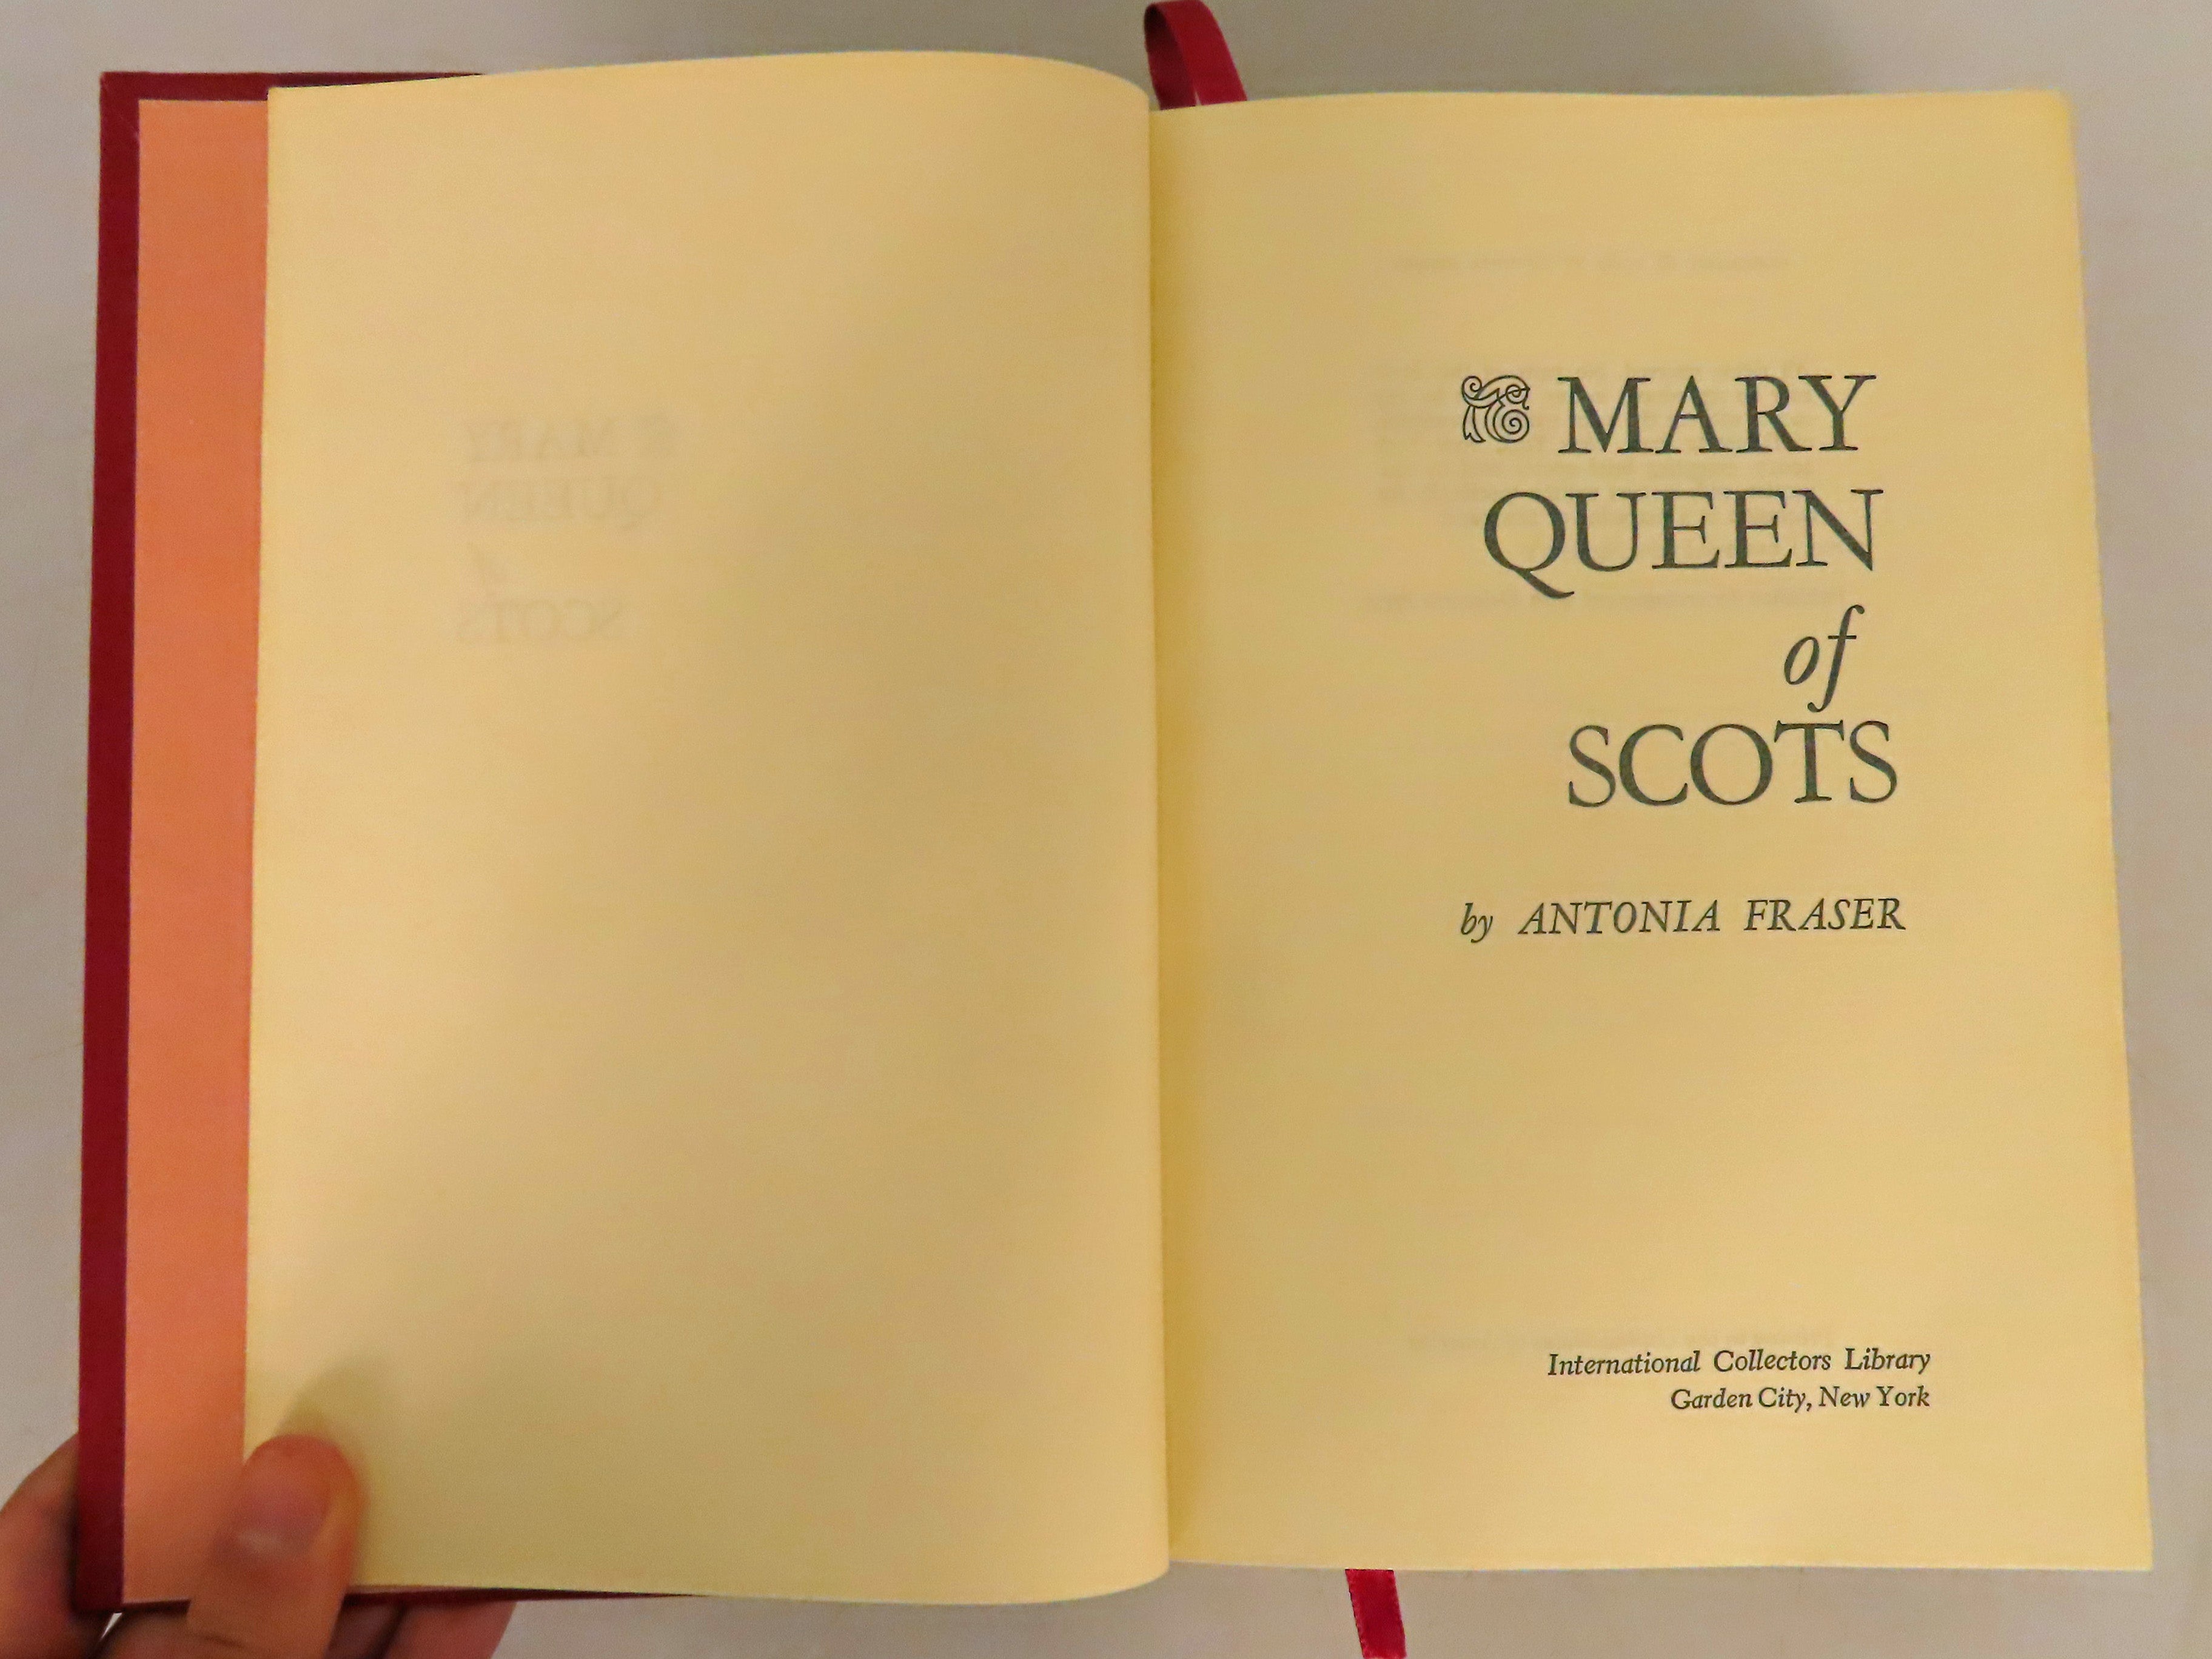 International Collectors Library Mary Queen of Scots by Antonia Fraser 1969